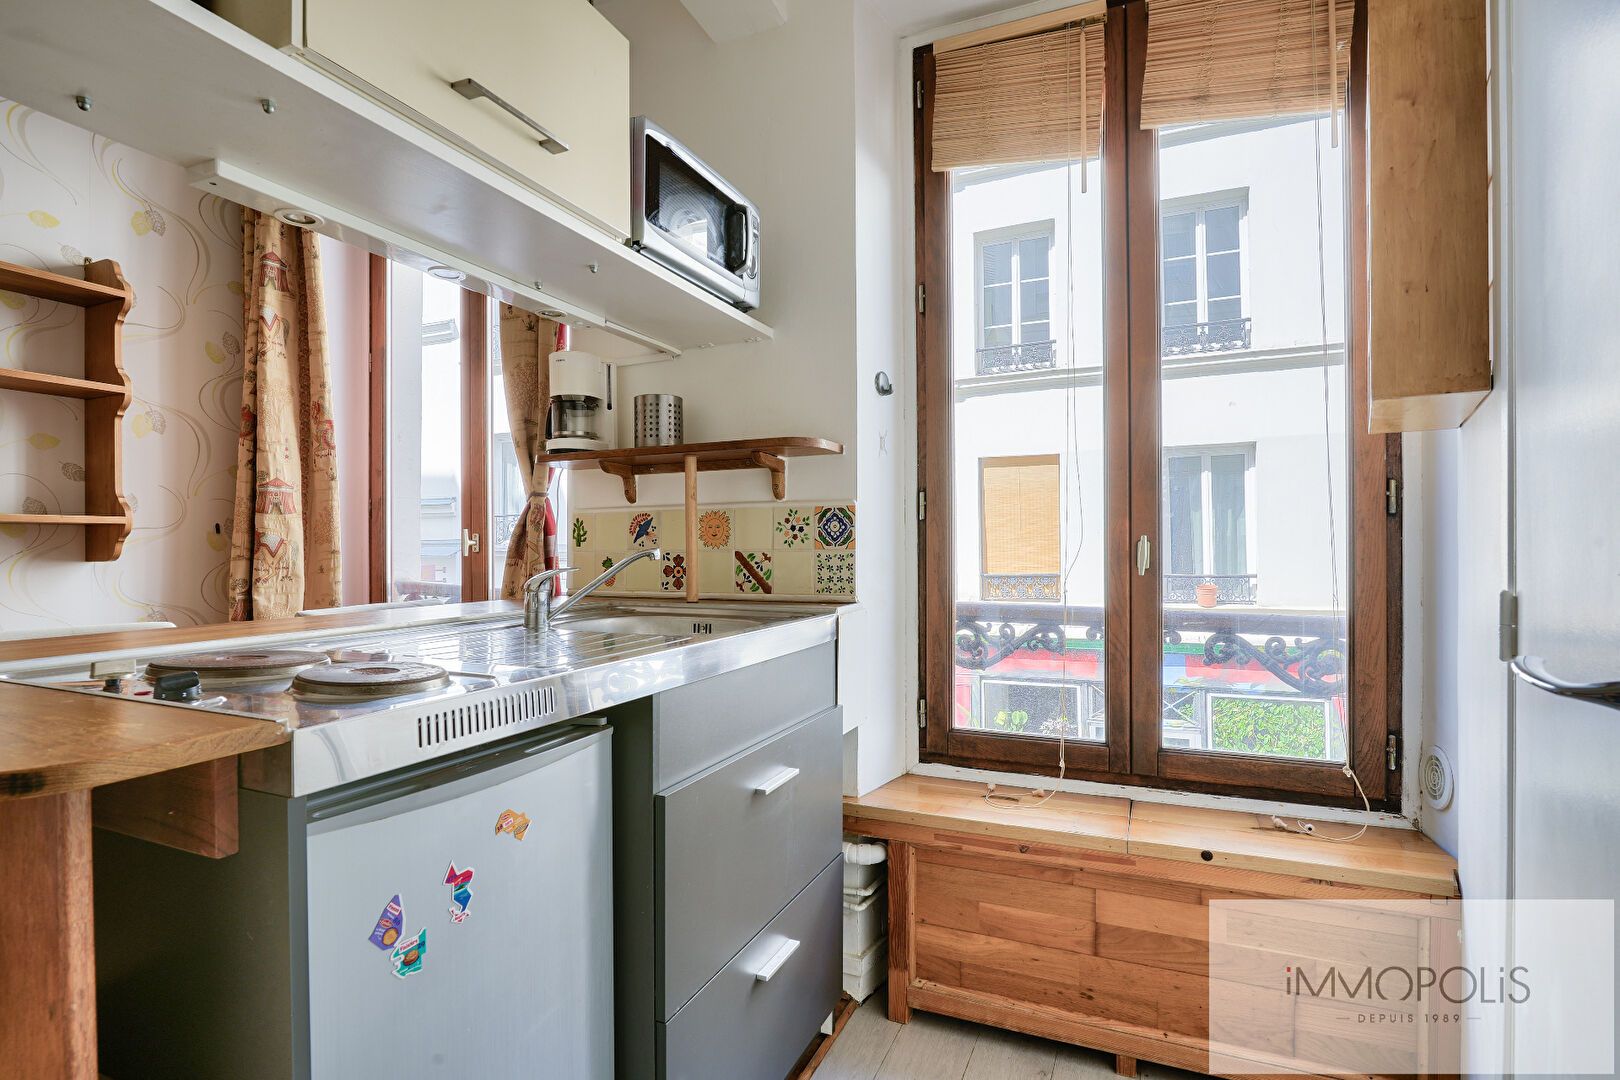 Beautiful studio in good condition well placed in Montmartre with a good DPE: e 6